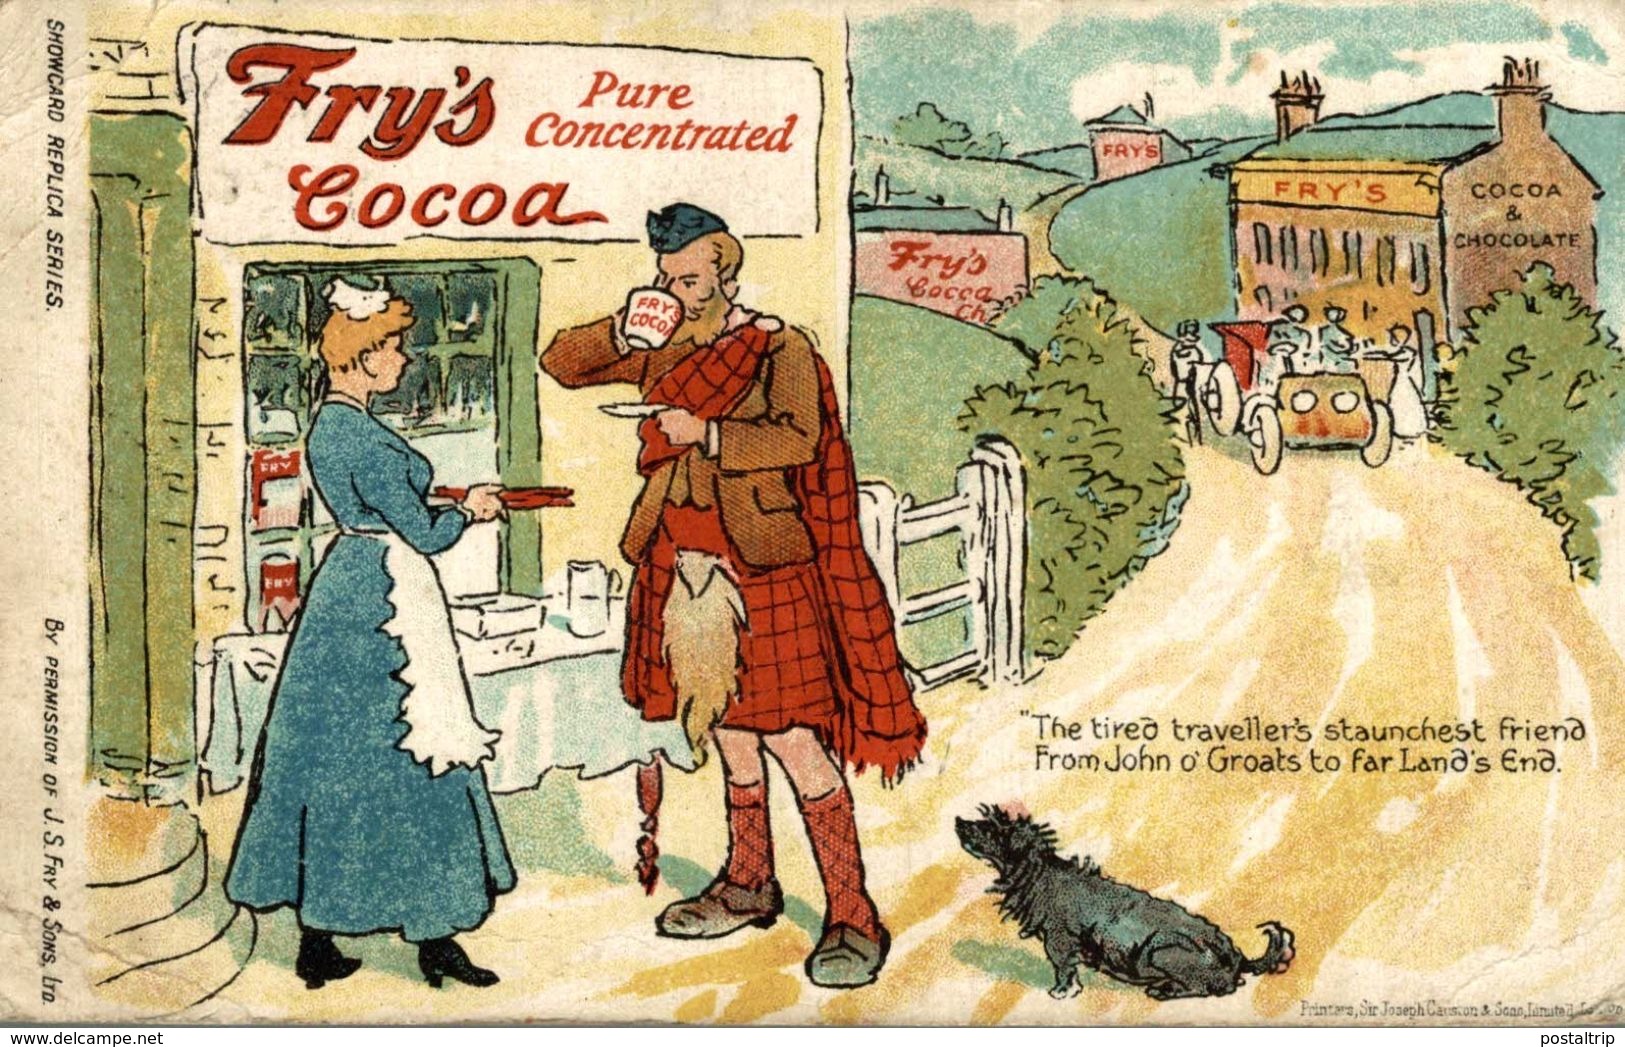 FRY'S COCOA - Advertising